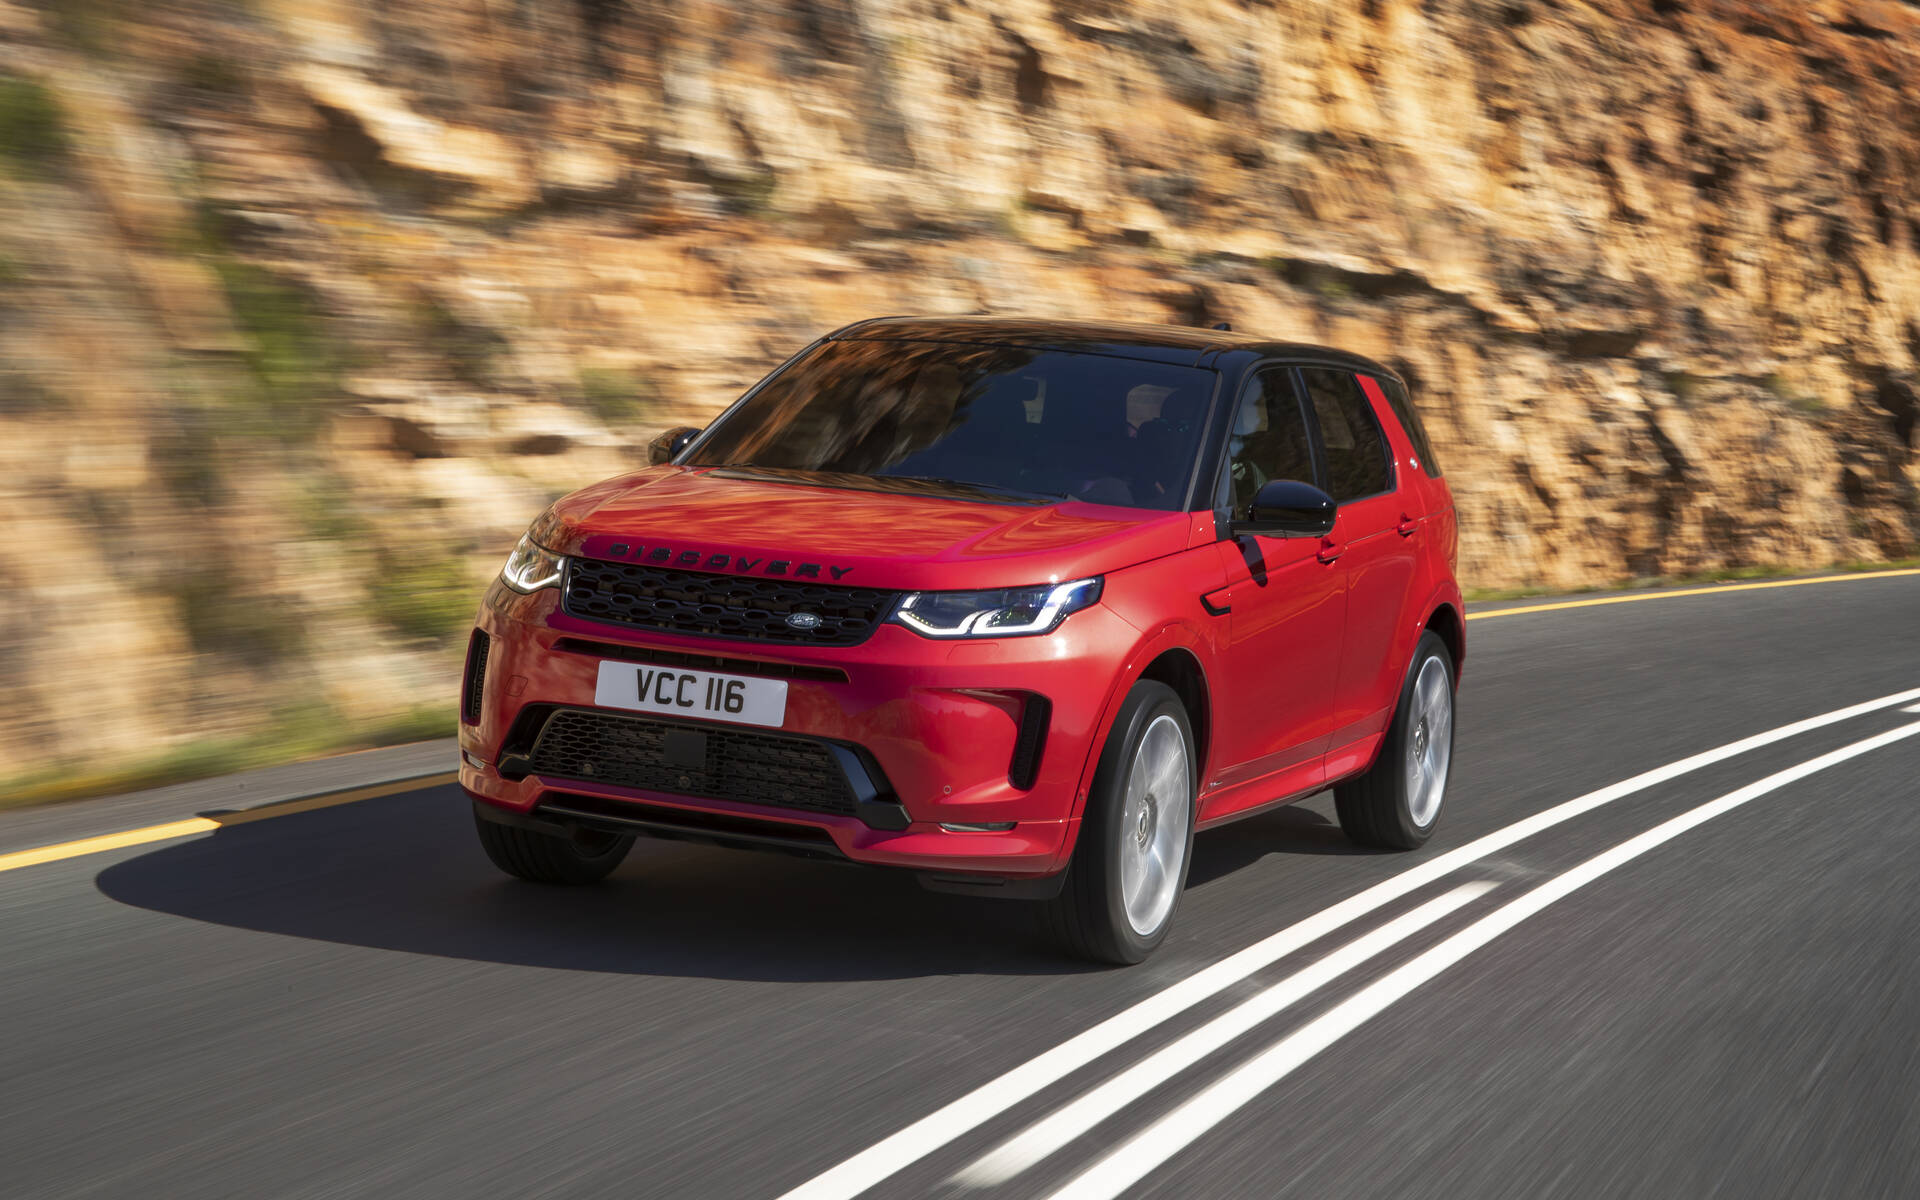 2021 land rover discovery configurations